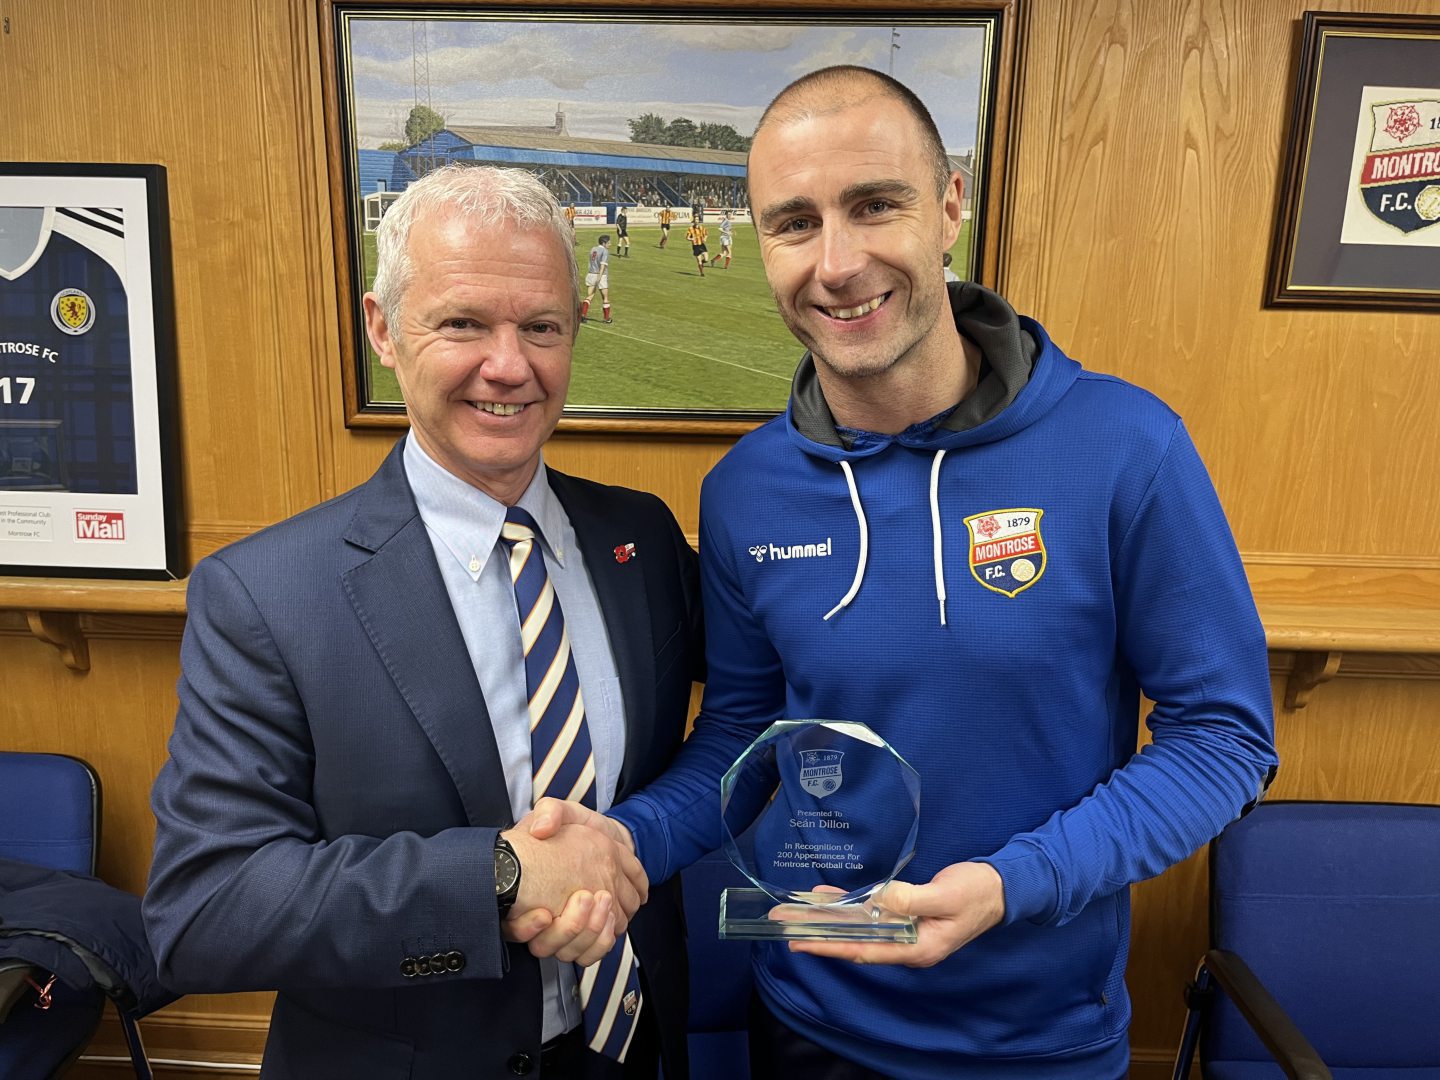 Montrose chief executive Peter Stuart presents Sean Dillon with a trophy to mark 200 appearances for the club. Image: Montrose FC